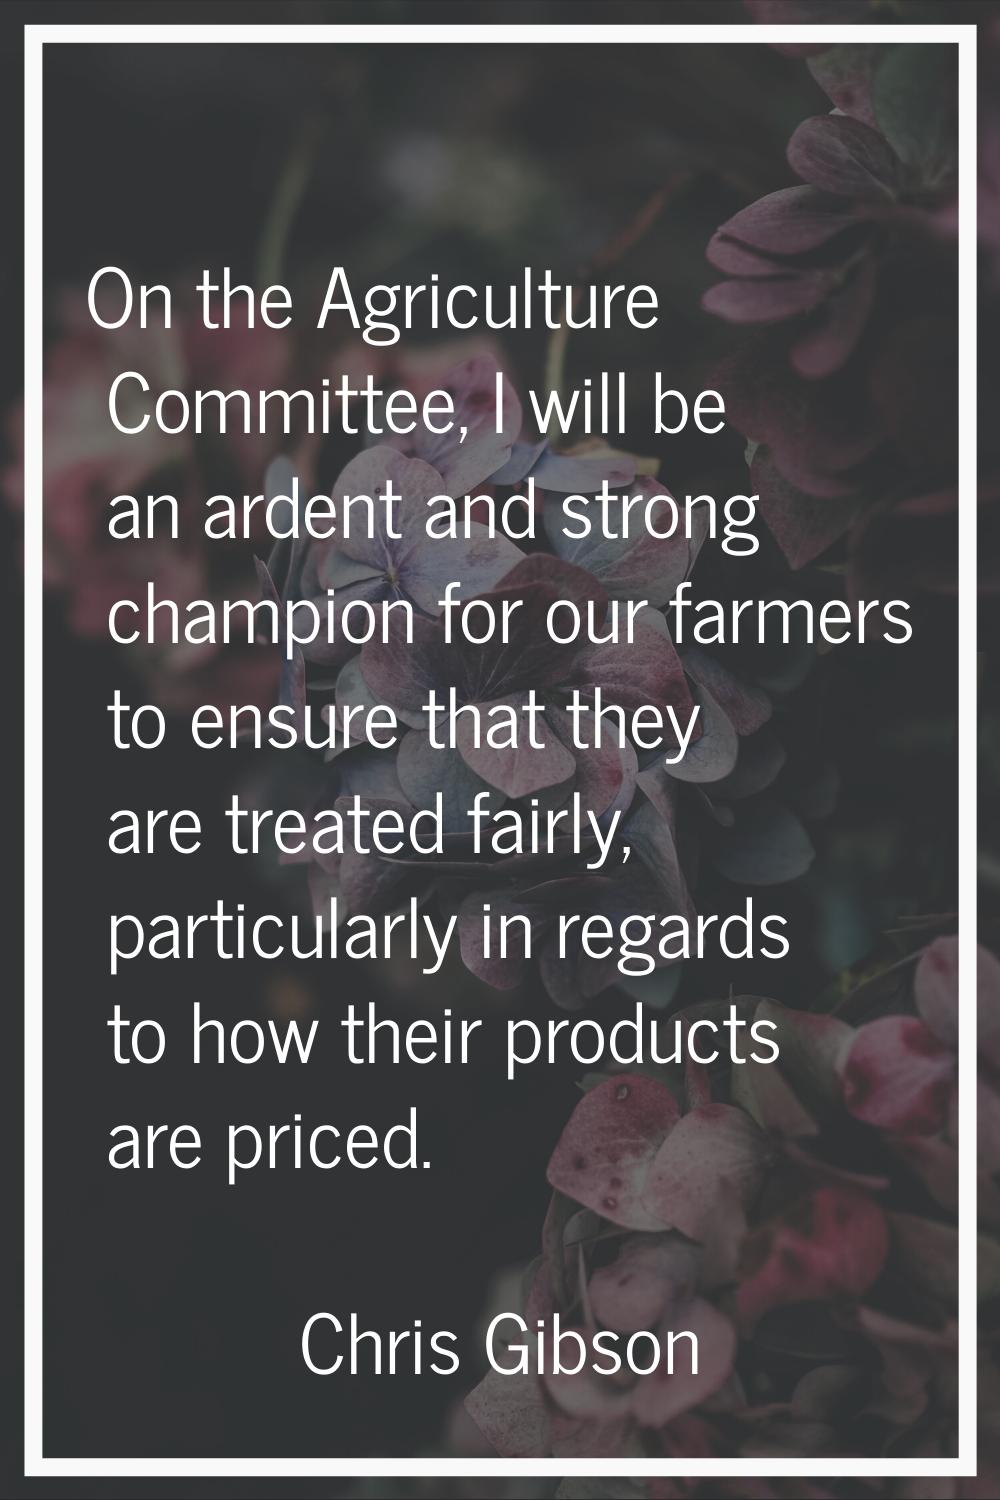 On the Agriculture Committee, I will be an ardent and strong champion for our farmers to ensure tha